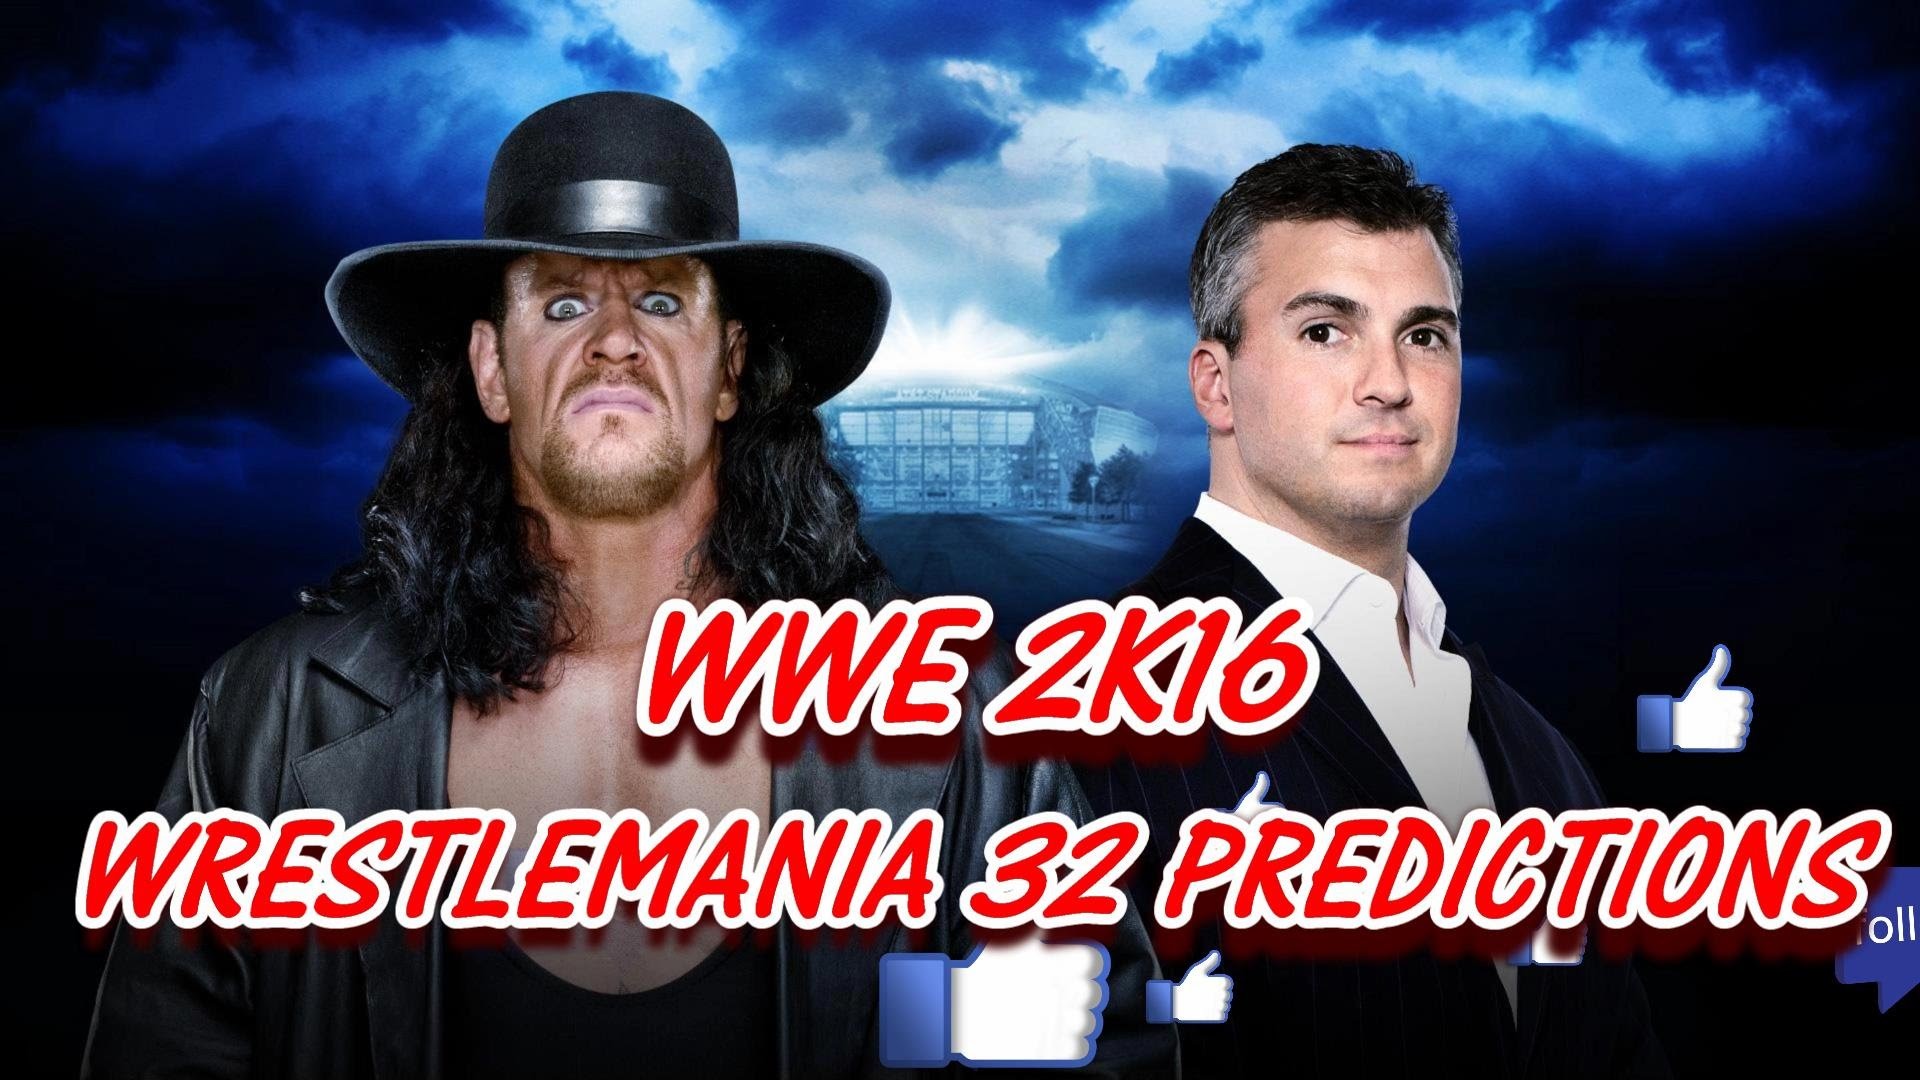 1920x1080 WWE WRESTLEMANIA 32 THE UNDERTAKER VS. SHANE MCMAHON - HELL IN A CELL MATCH  WWE 2K16 PREDICTIONS - YouTube